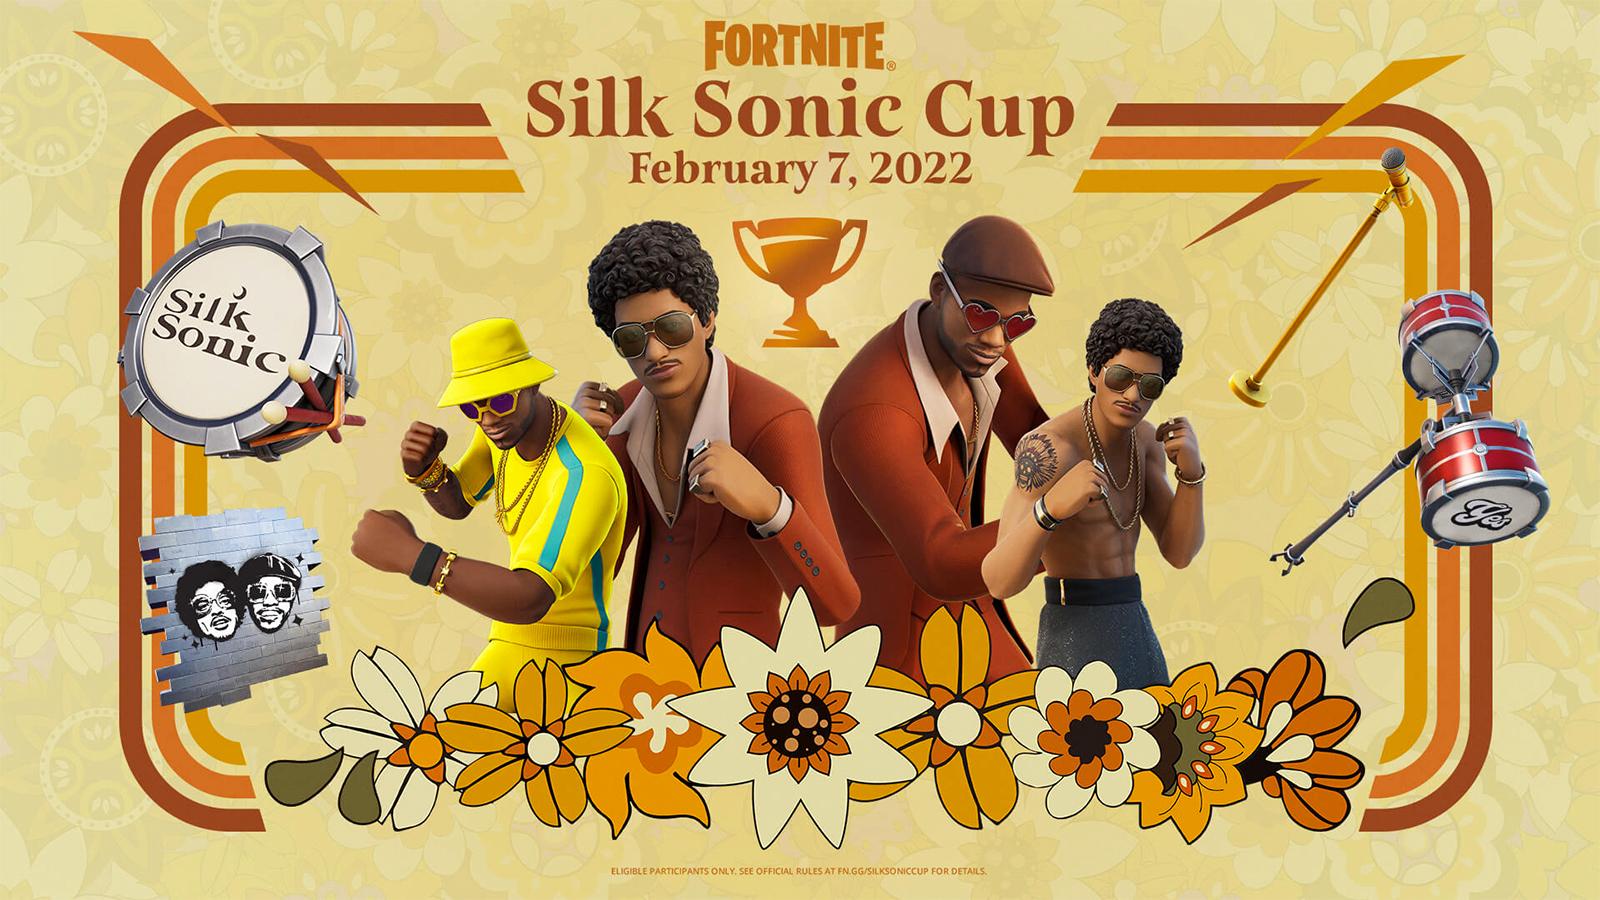 A poster for the Fortnite Silk Sonic Cup